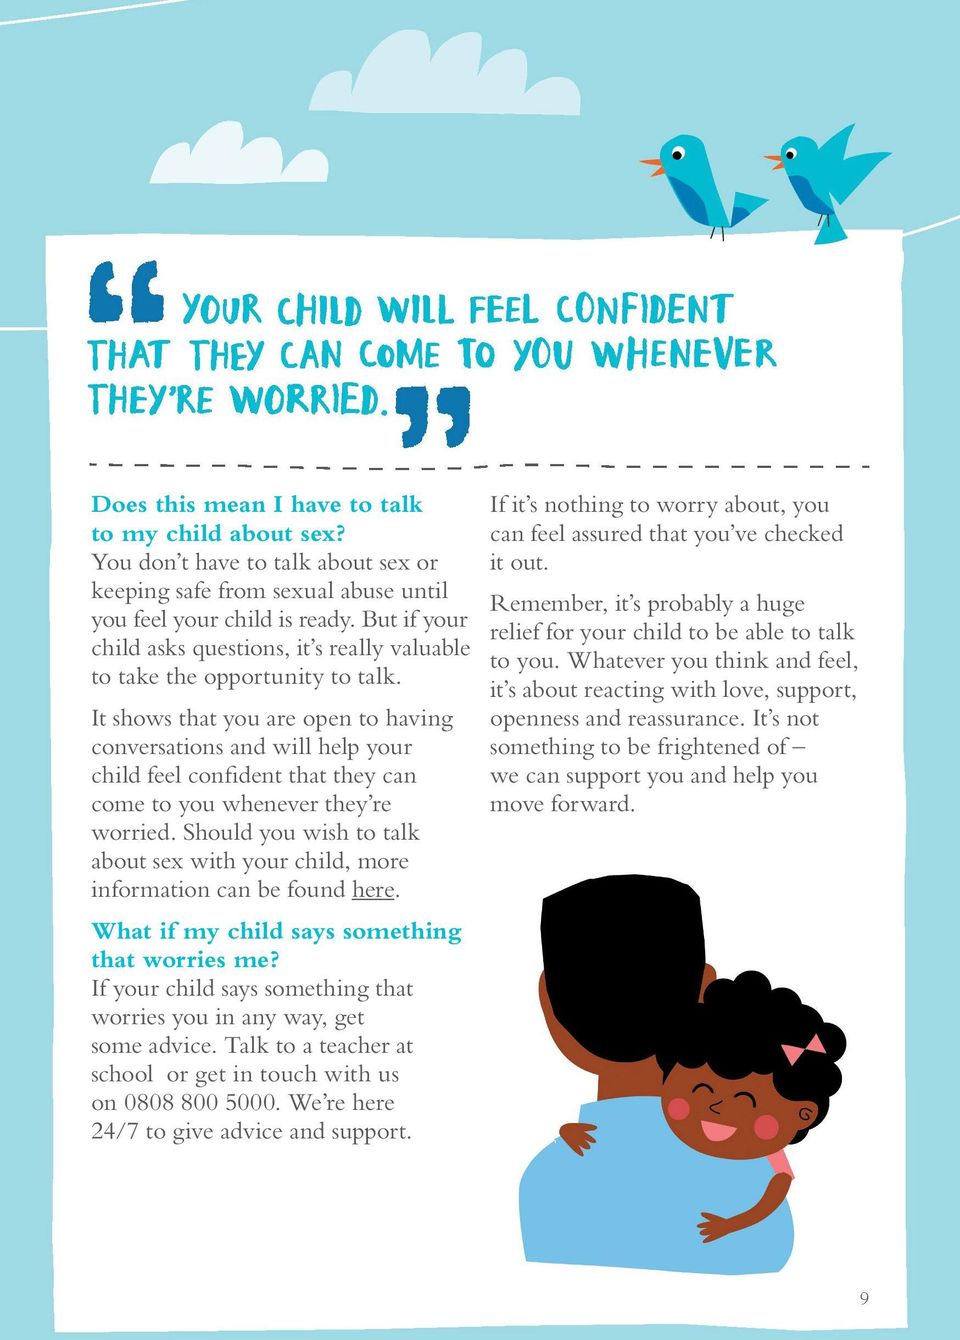 It shows that you are open to having conversations and will help your child feel confident that they can come to you whenever they re worried.